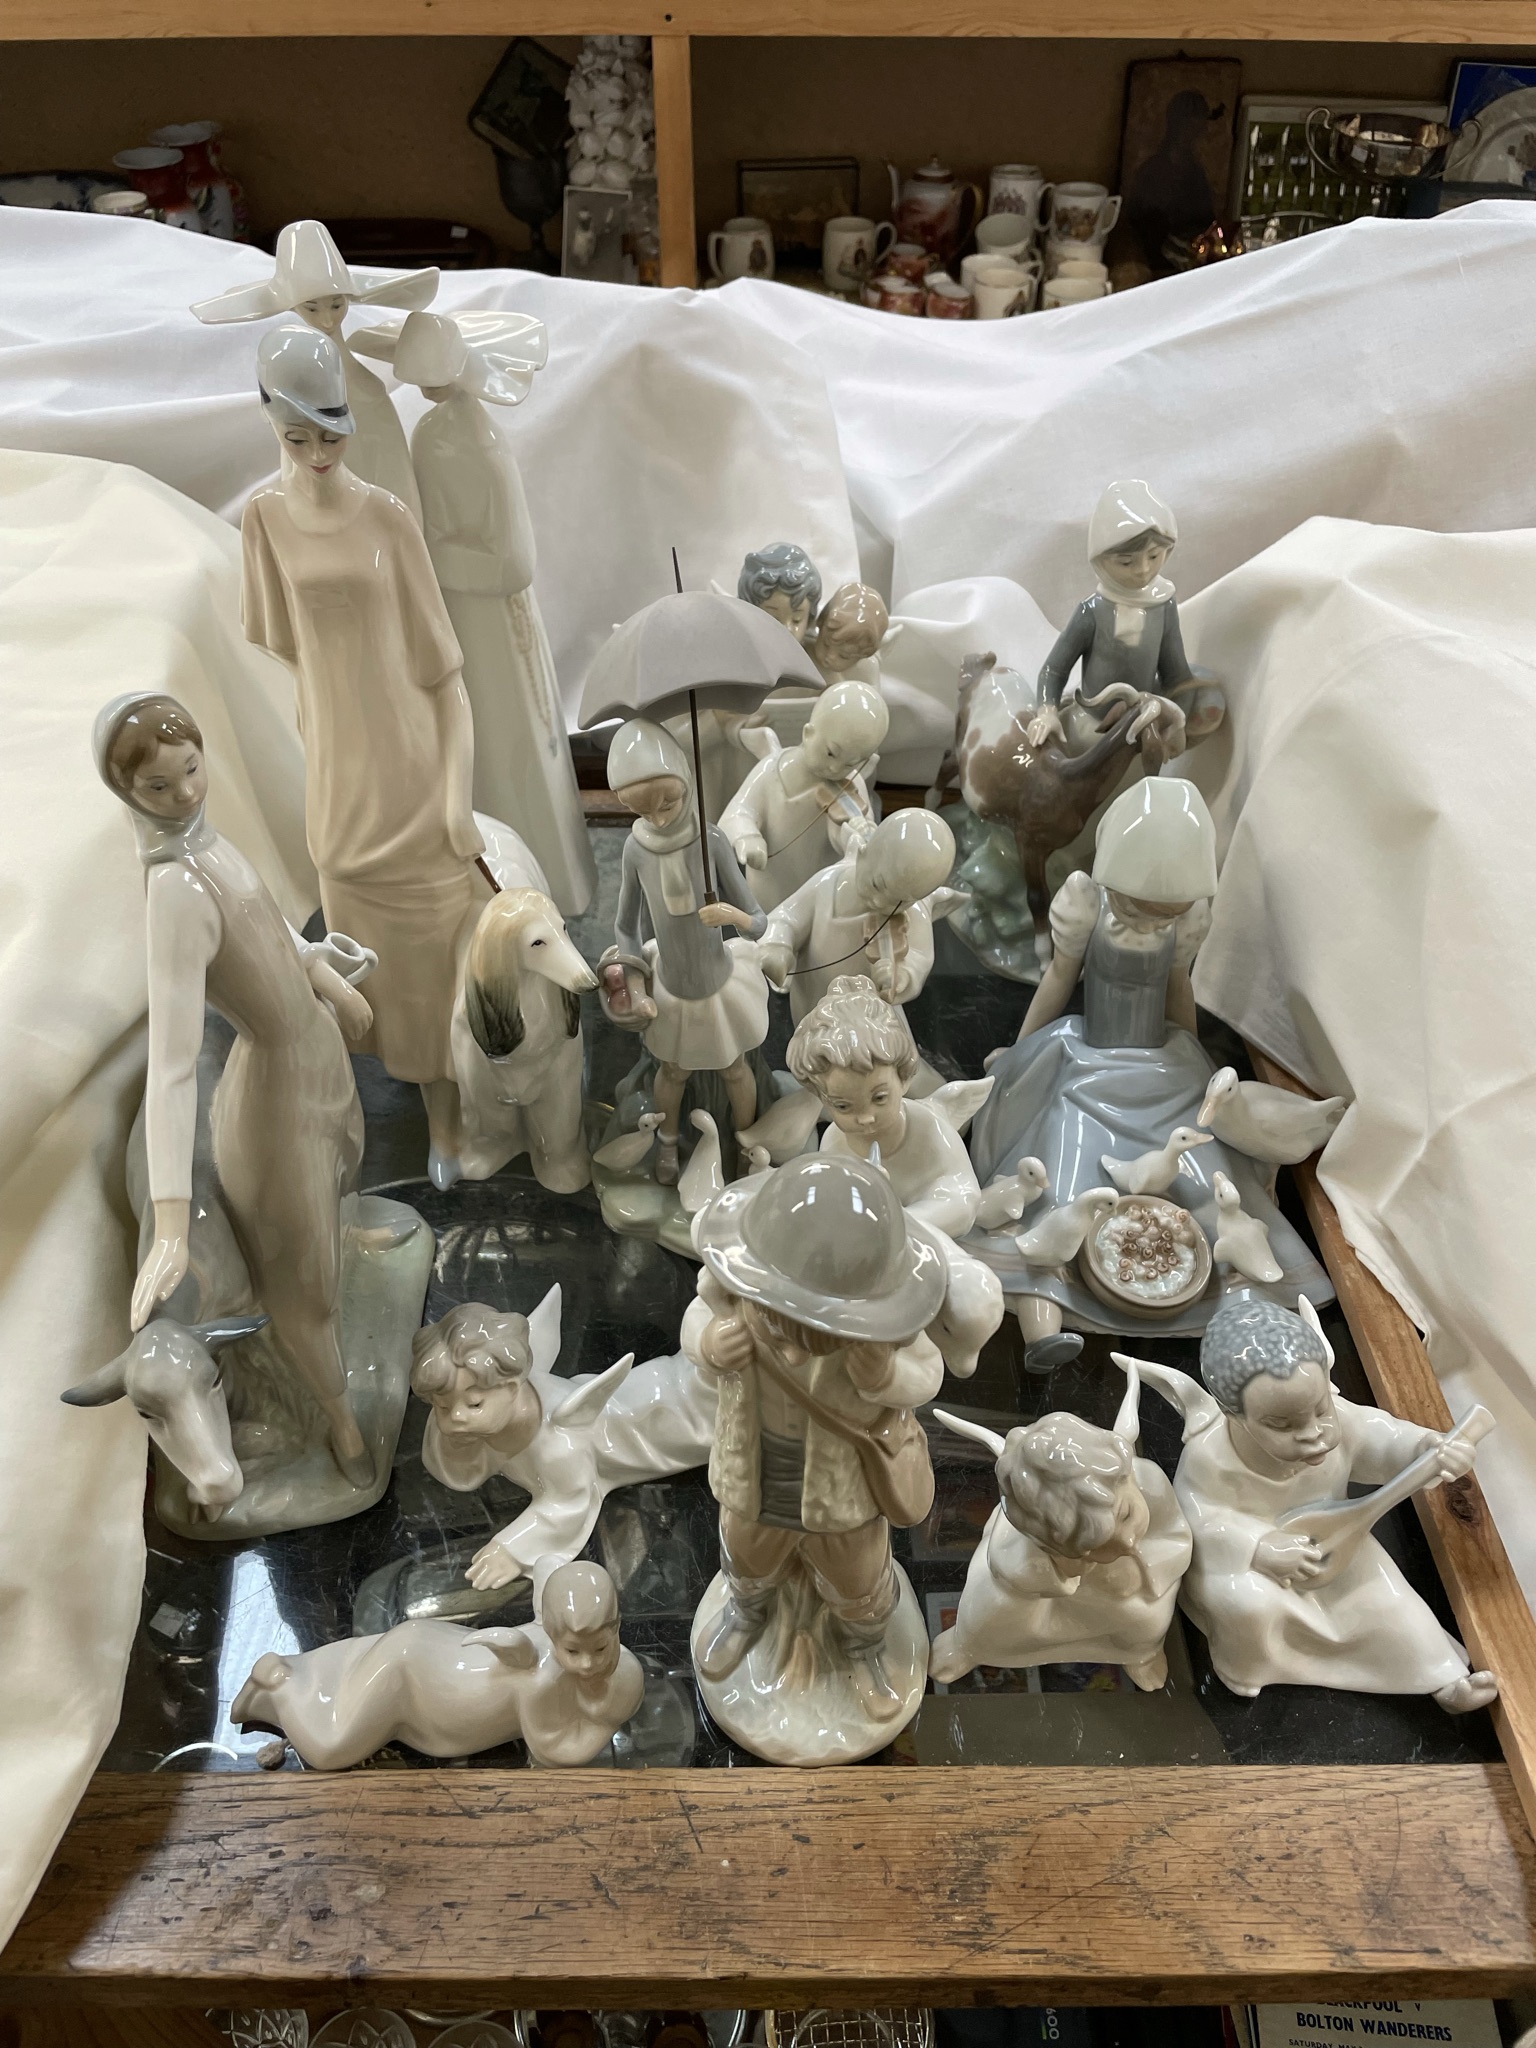 A Lladro figure of two nuns together with a collection of Lladro,